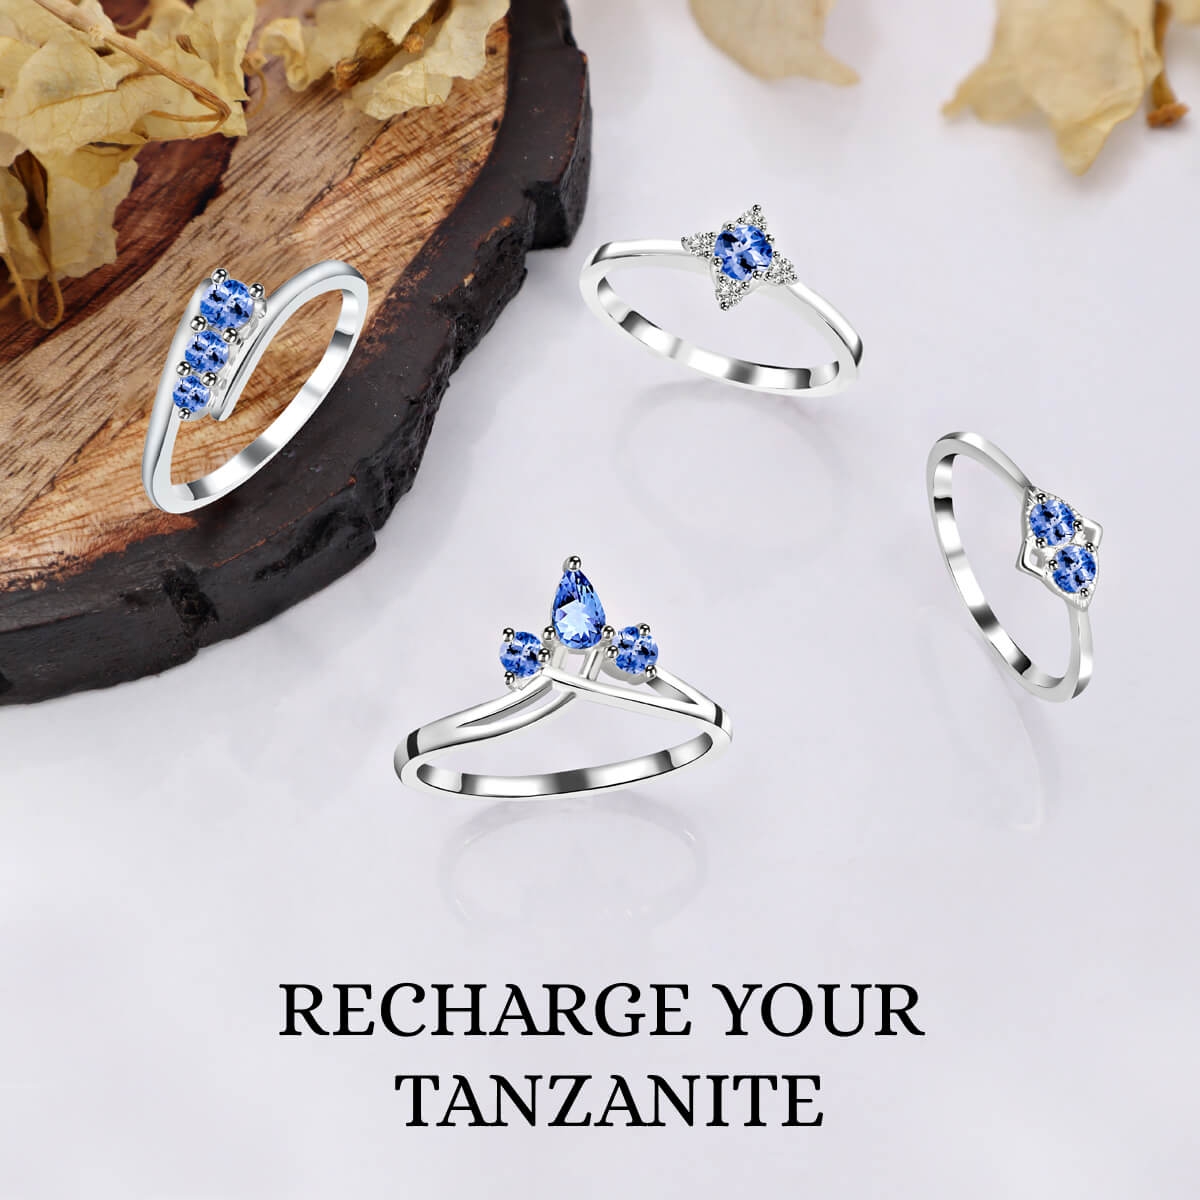 How to Recharge Your Tanzanite Jewelry